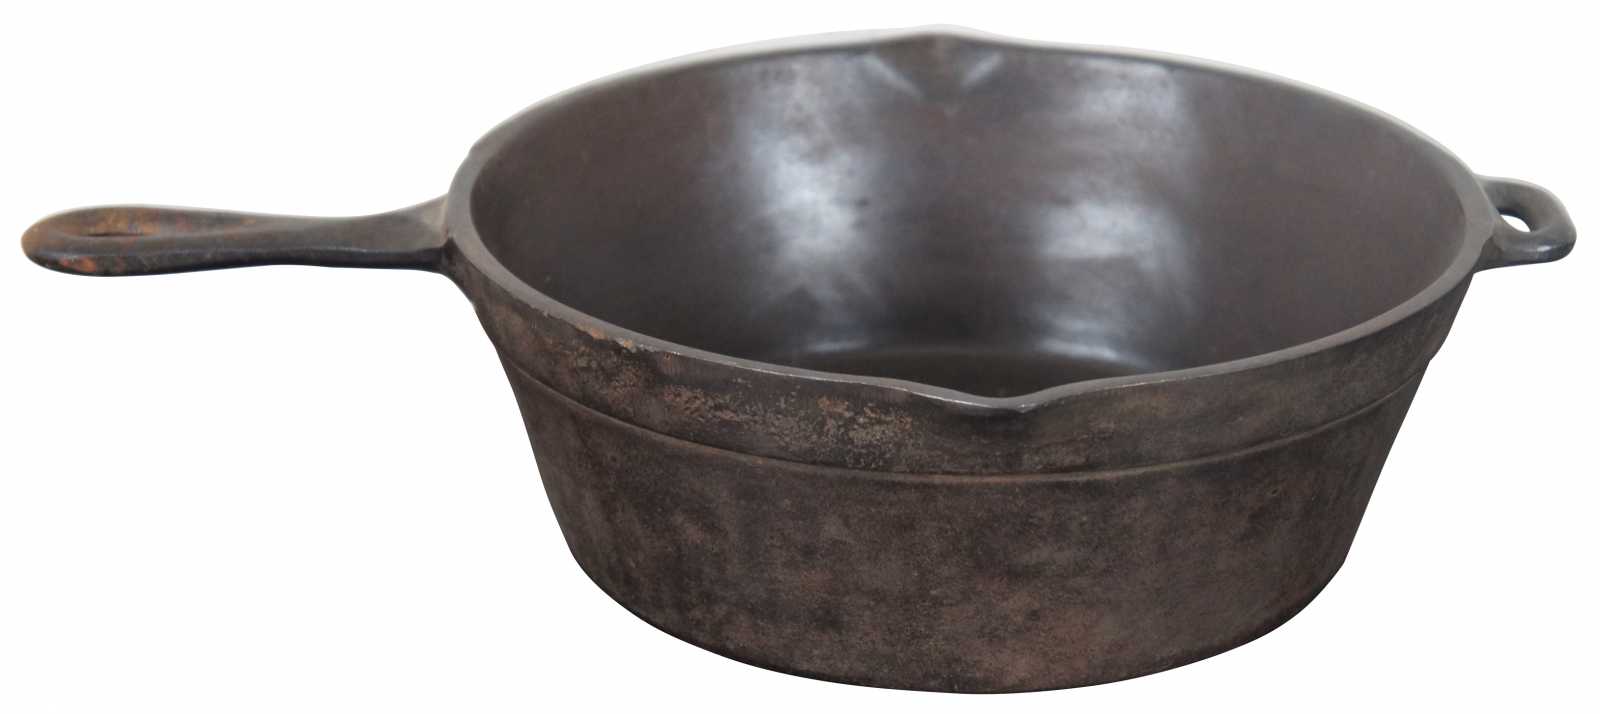 Vintage Unmarked Cast Iron Deep Fry Pan Cooking Pot Handled 16